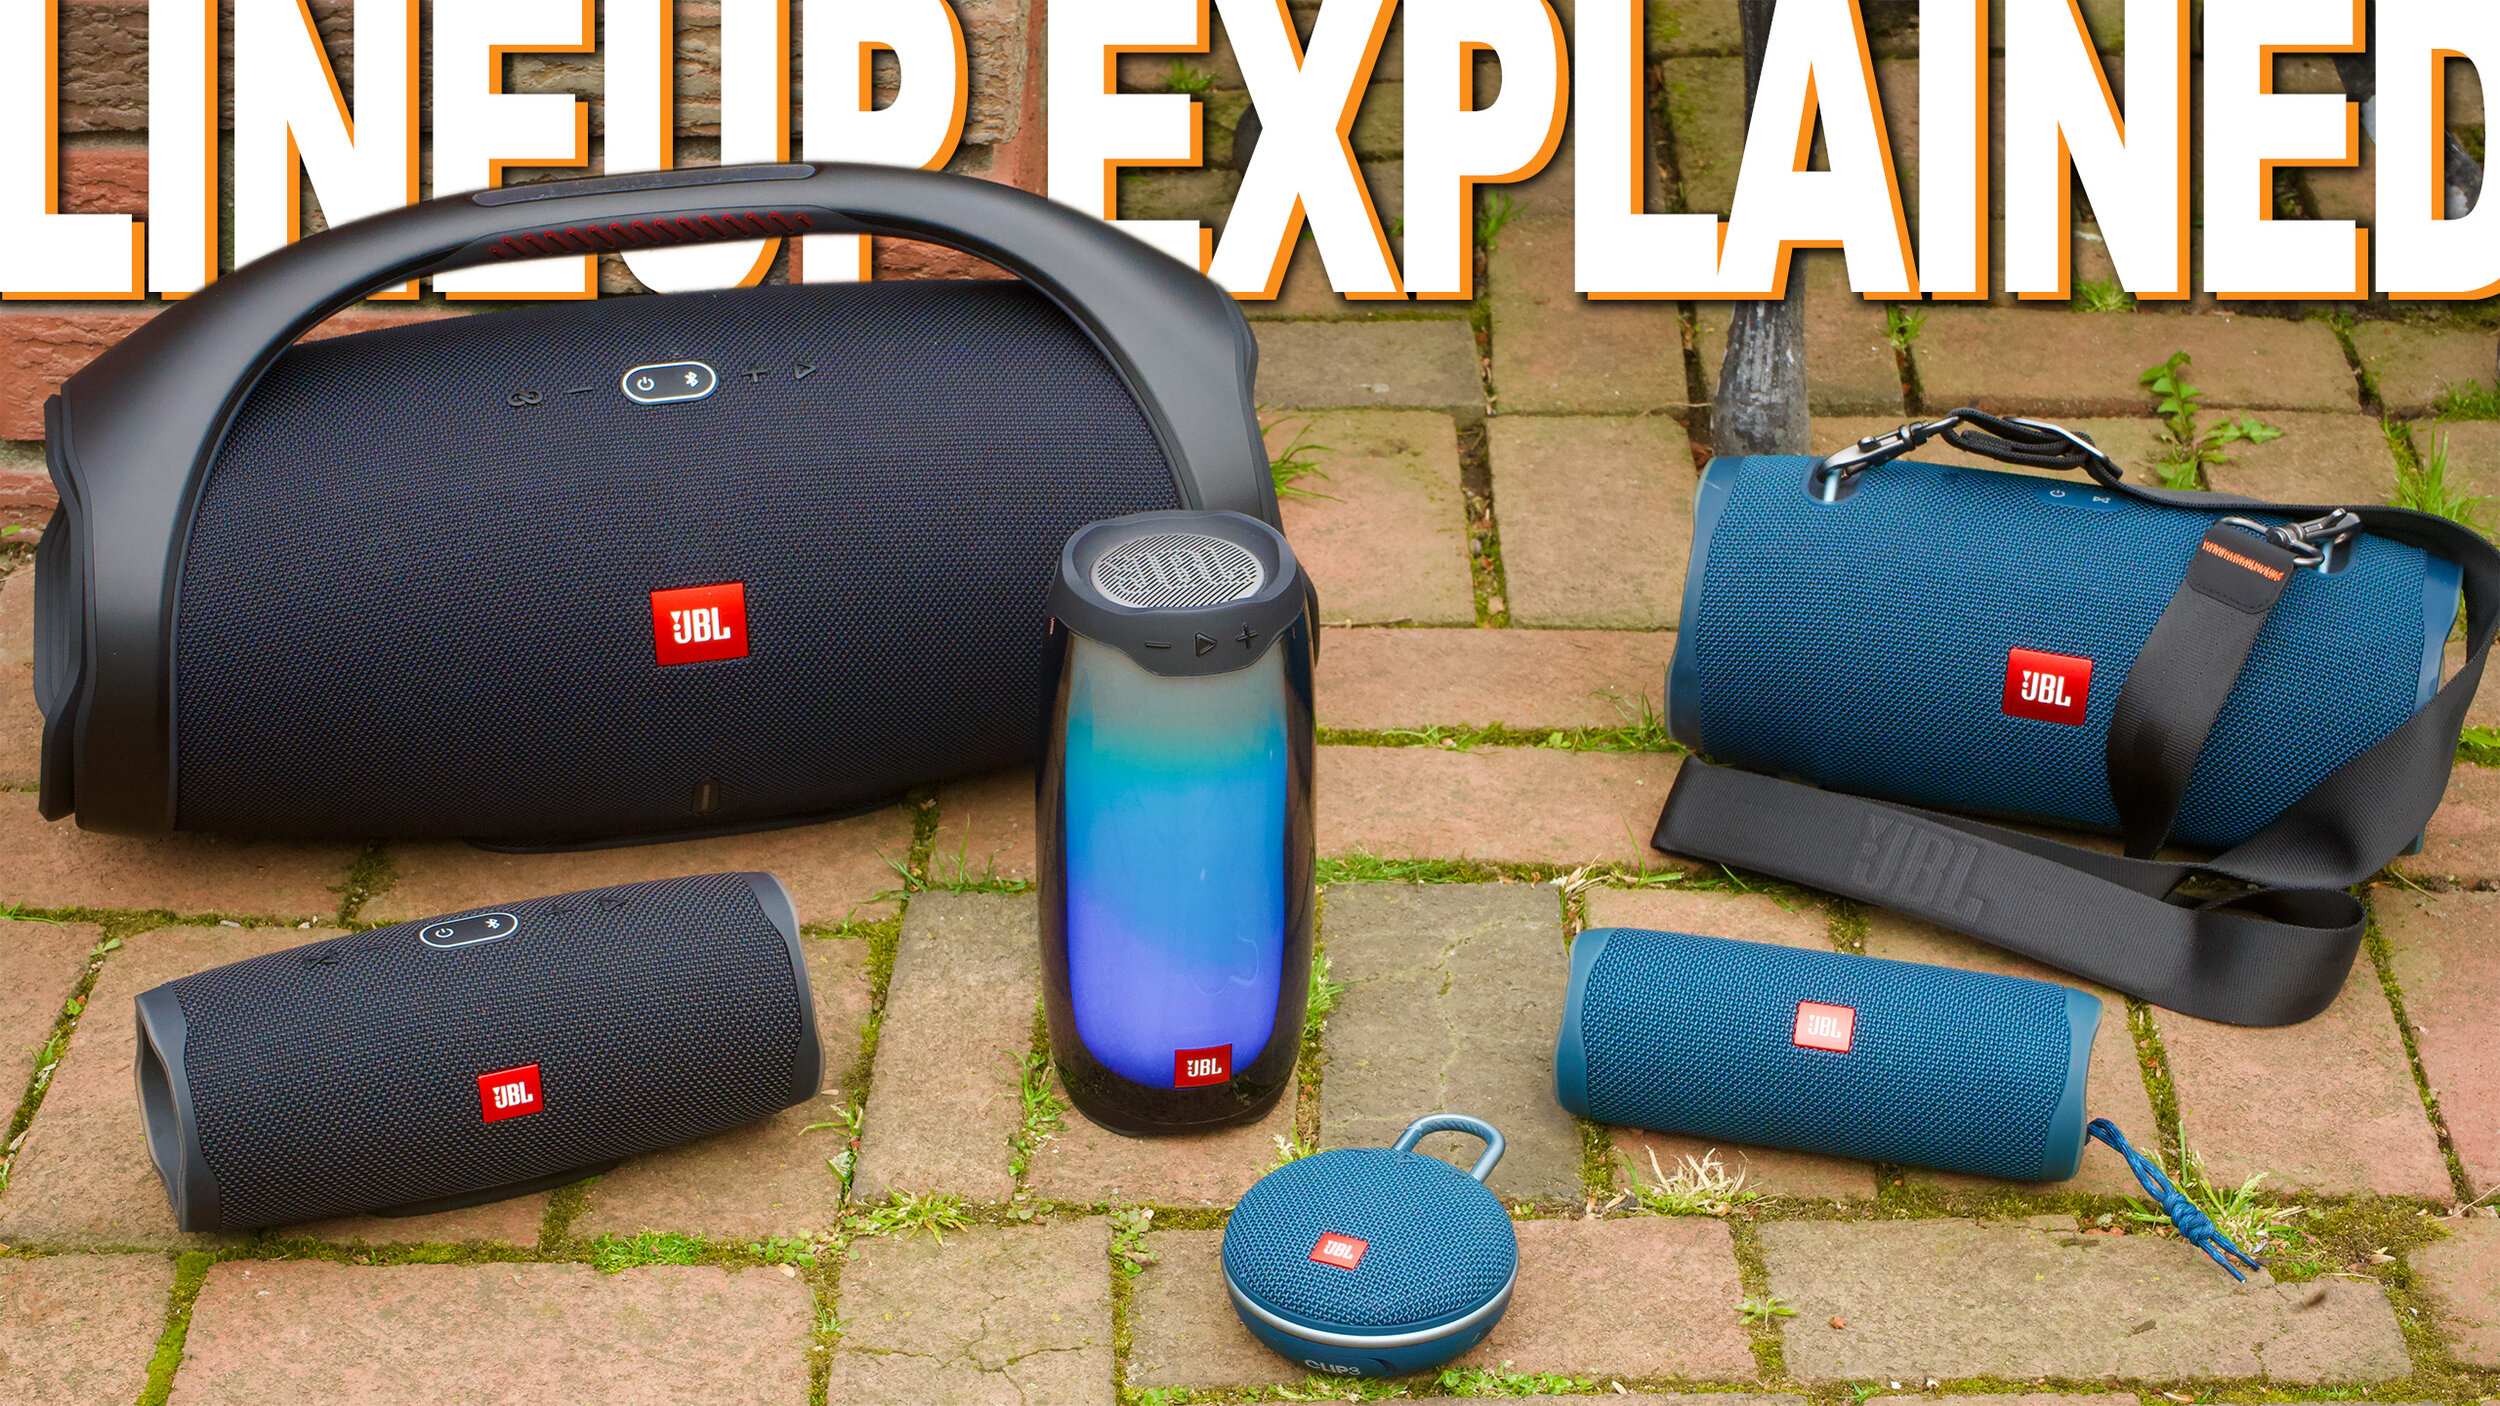 compare jbl xtreme and jbl xtreme 2